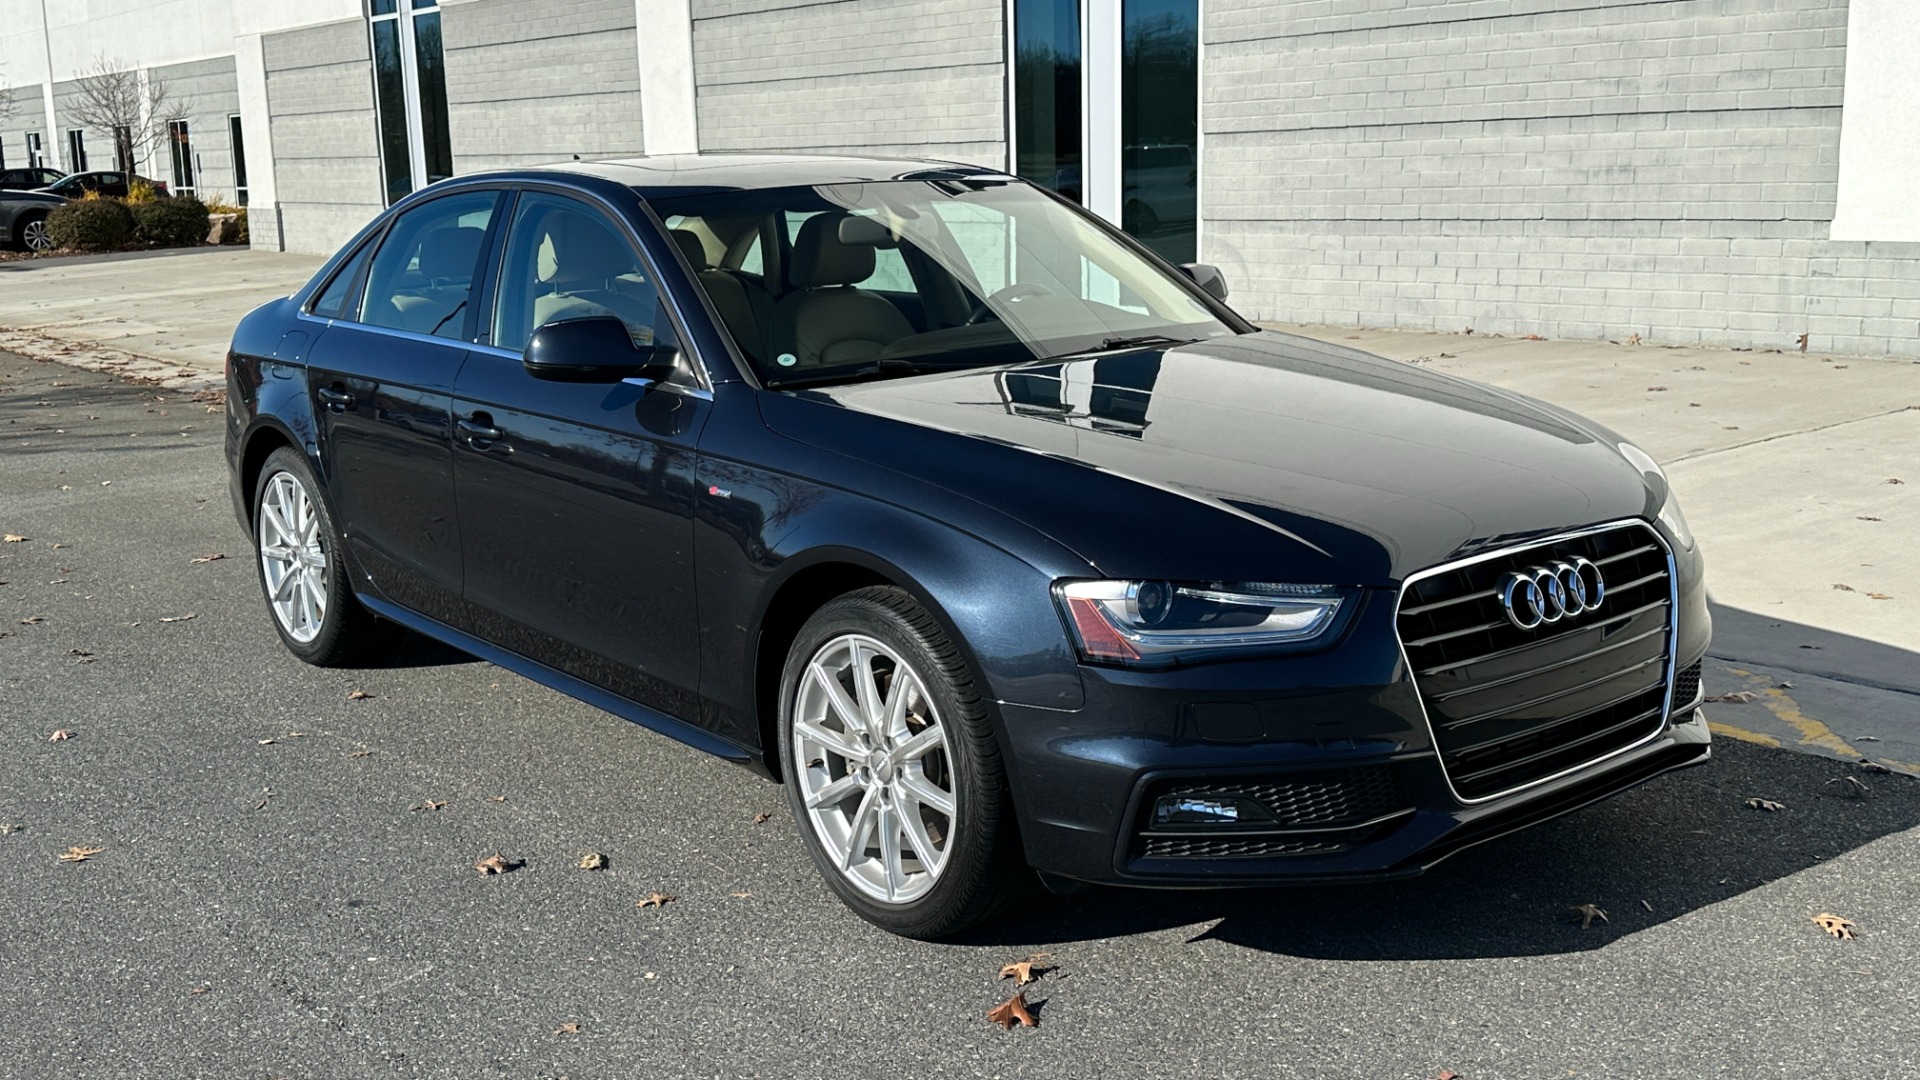 Used 2014 Audi A4 PREMIUM PLUS / NAVIGATION PLUS / BLINDSPOT ASSIST / LEATHER / SUNROOF for sale $19,298 at Formula Imports in Charlotte NC 28227 7